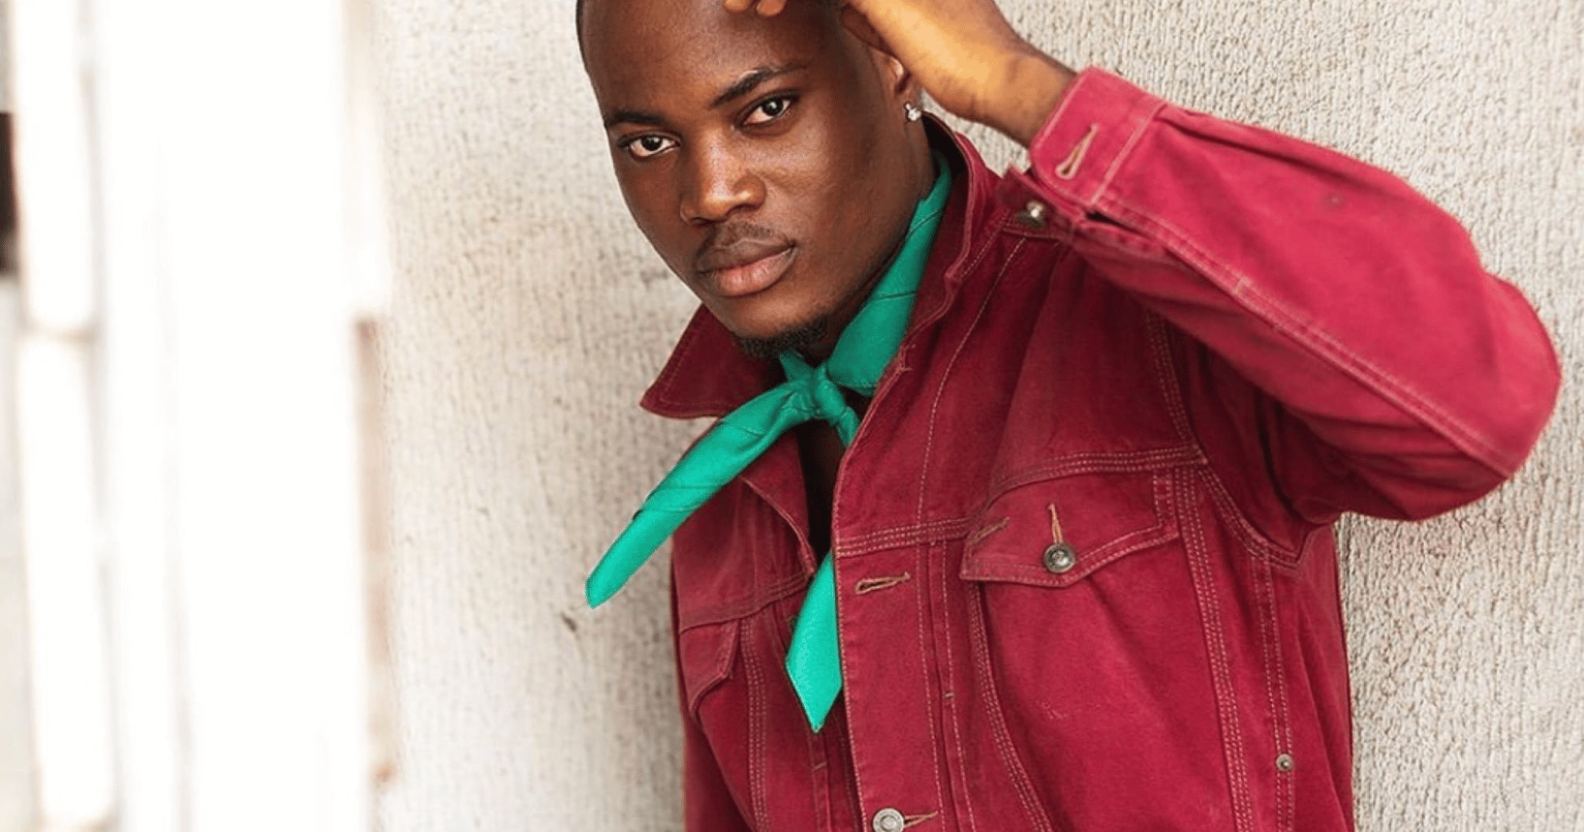 Nollywood actor Godwin Maduagu bravely comes out as gay